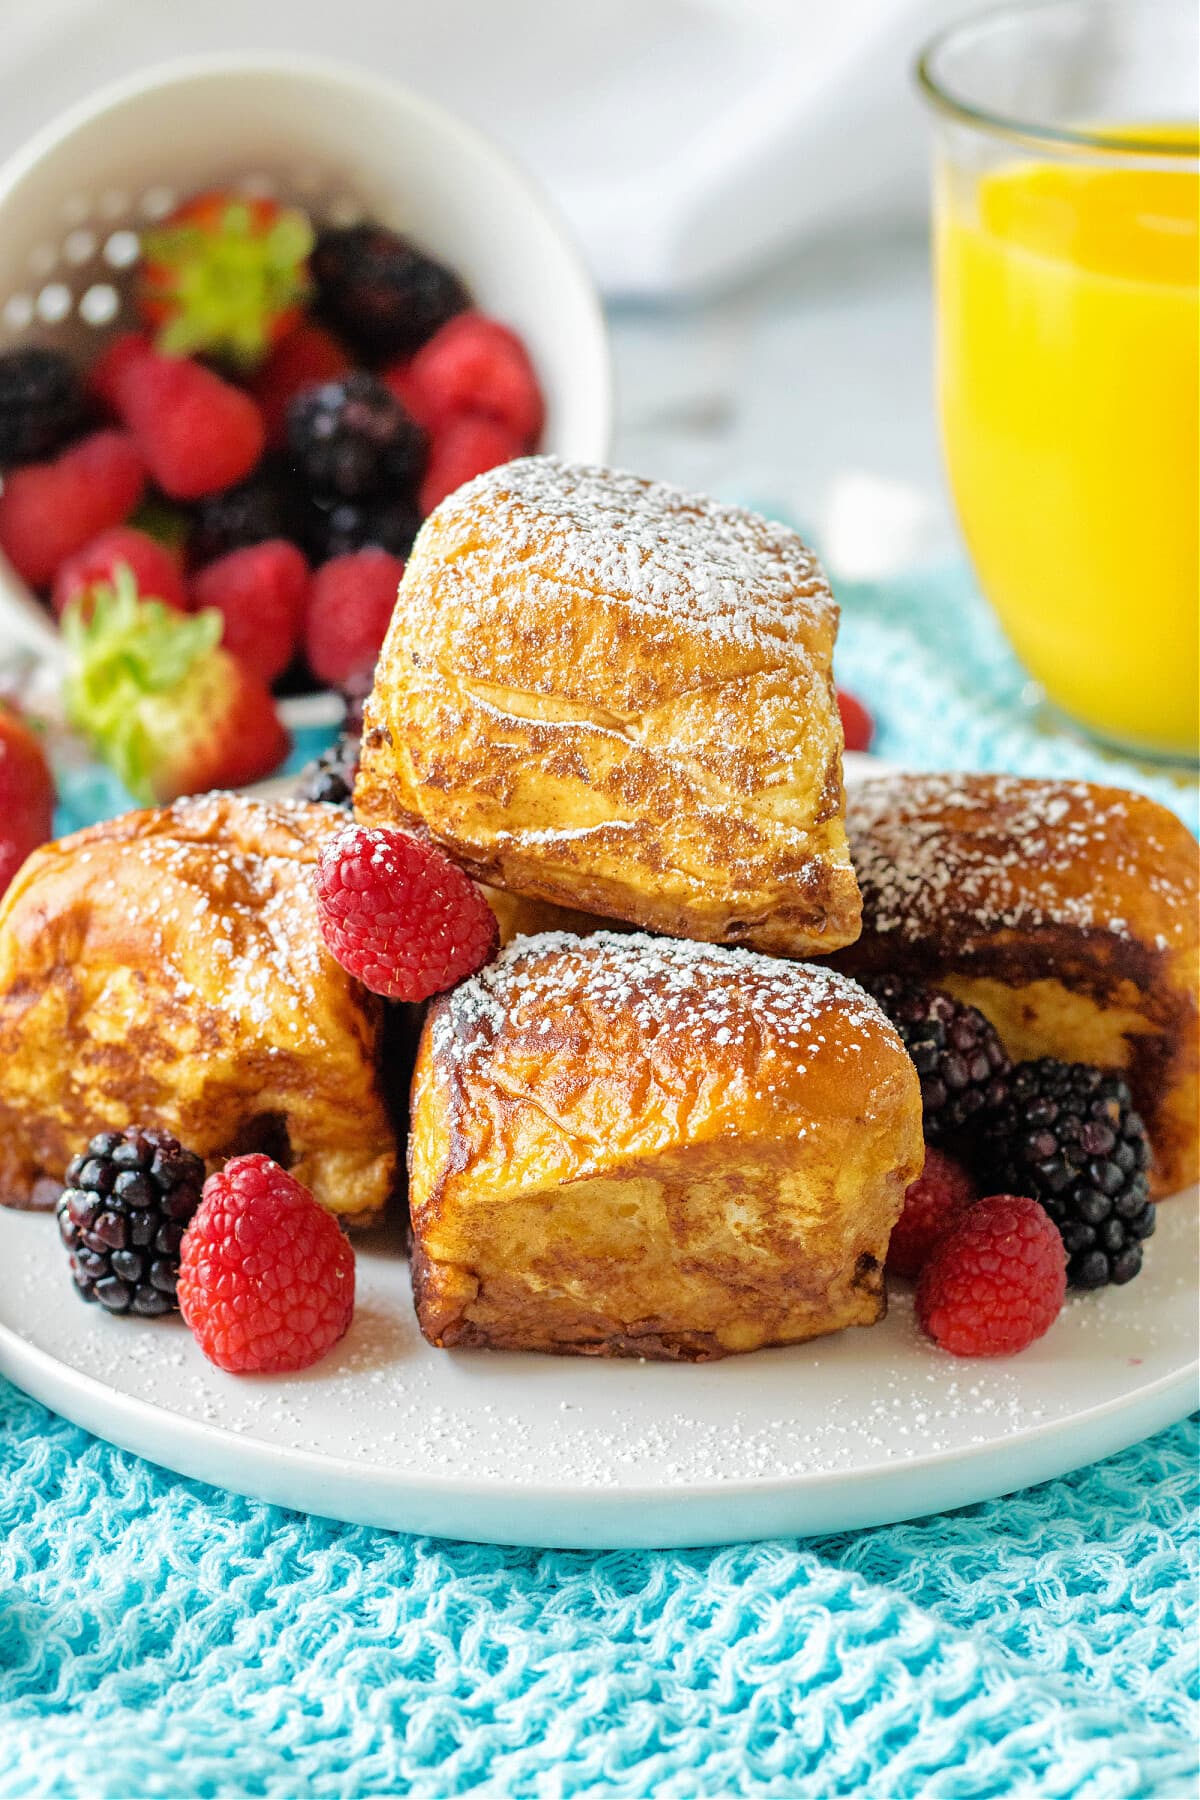 hawaiian roll french toast on white plate with powdered sugar, fruit and orange juice in glass